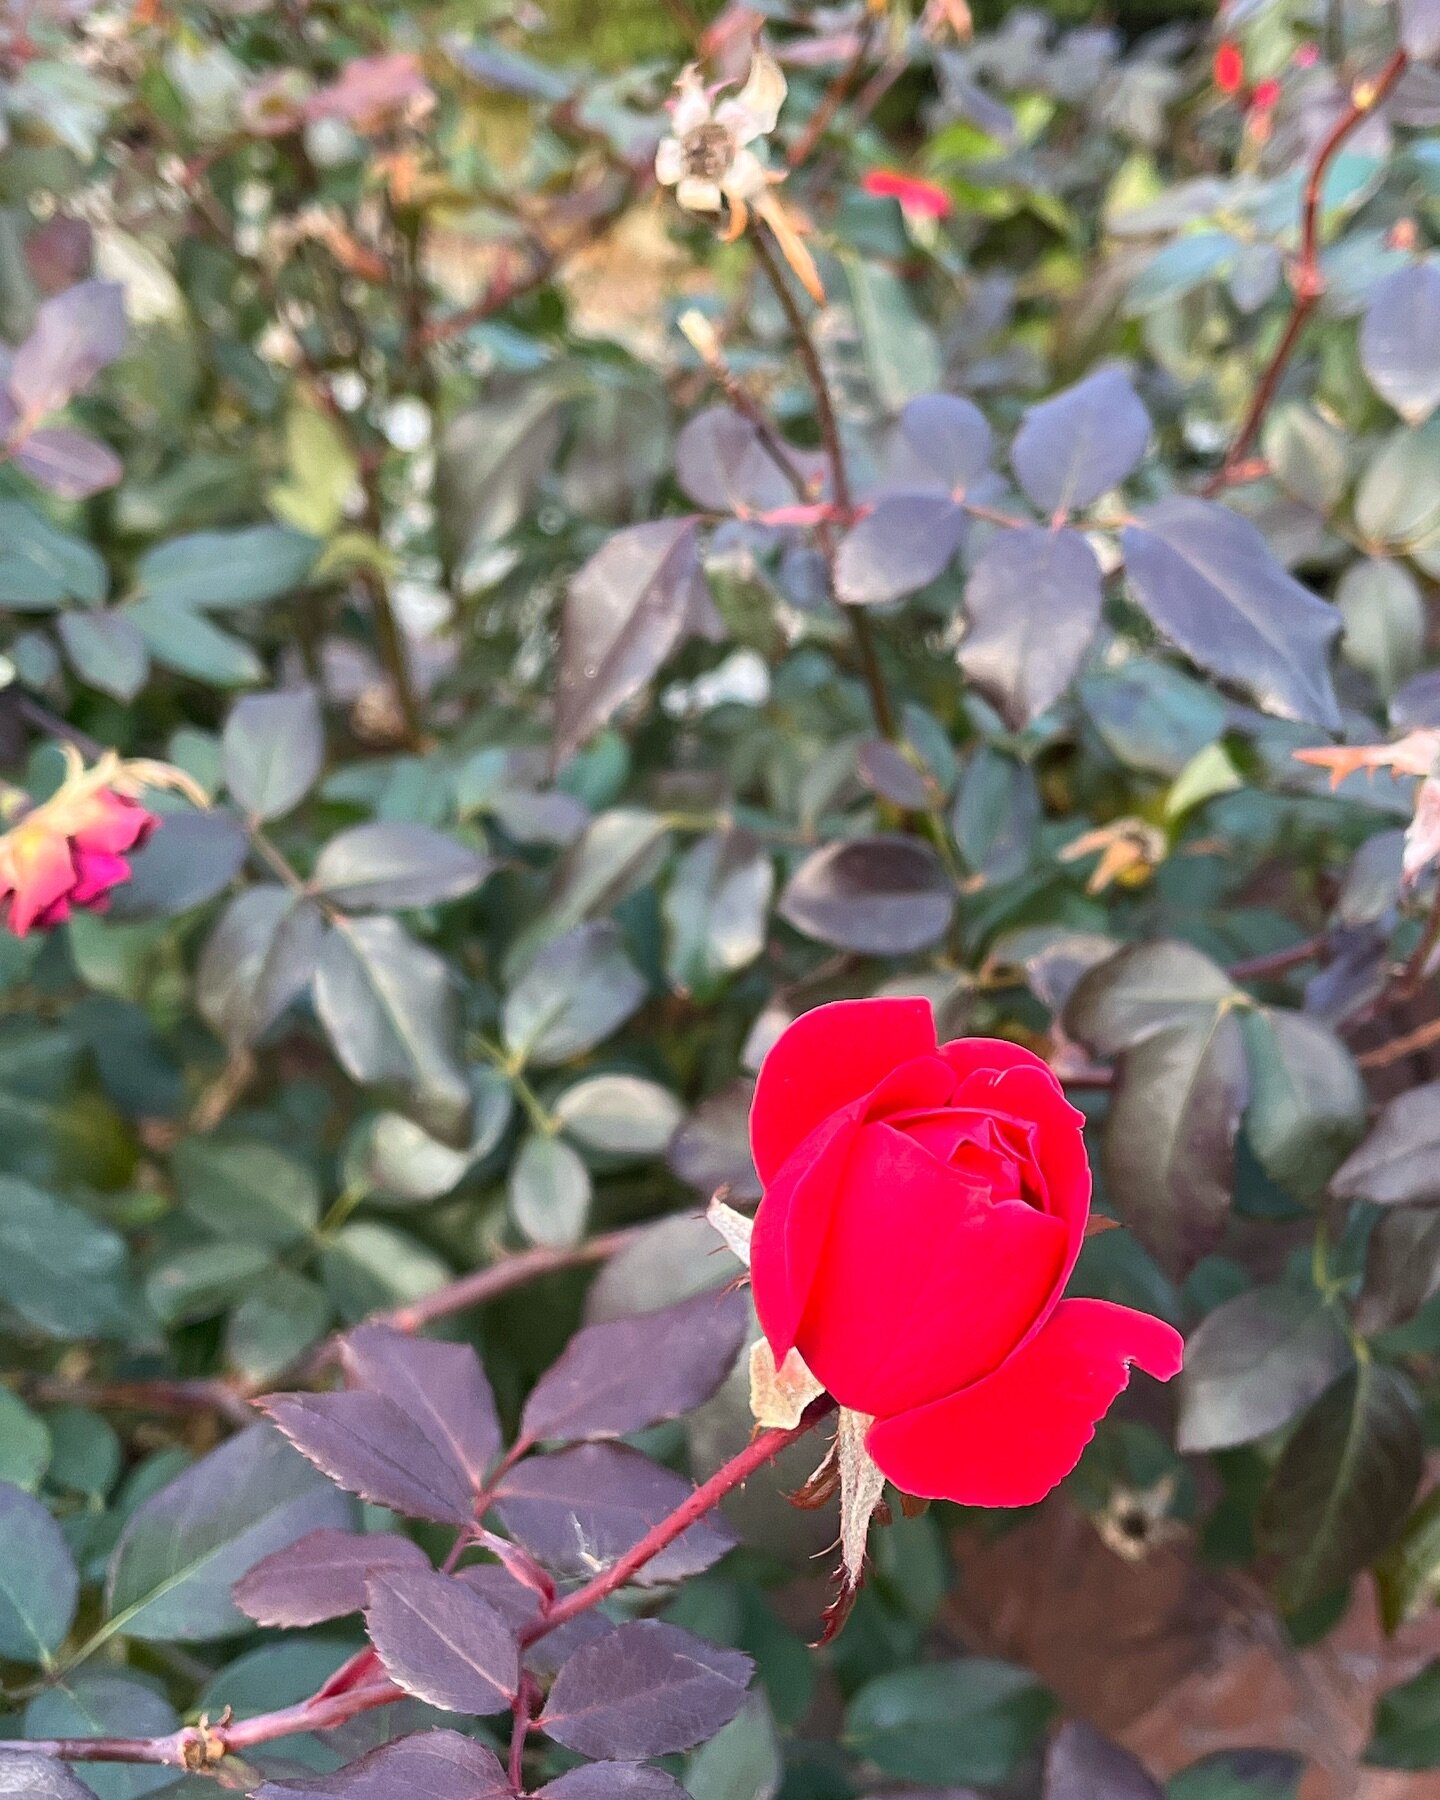 Happy December! This December 1st rose is so bright a red my iPhone camera can&rsquo;t quite make sense of it. How surprising and unexpected life is🌹✨#garden